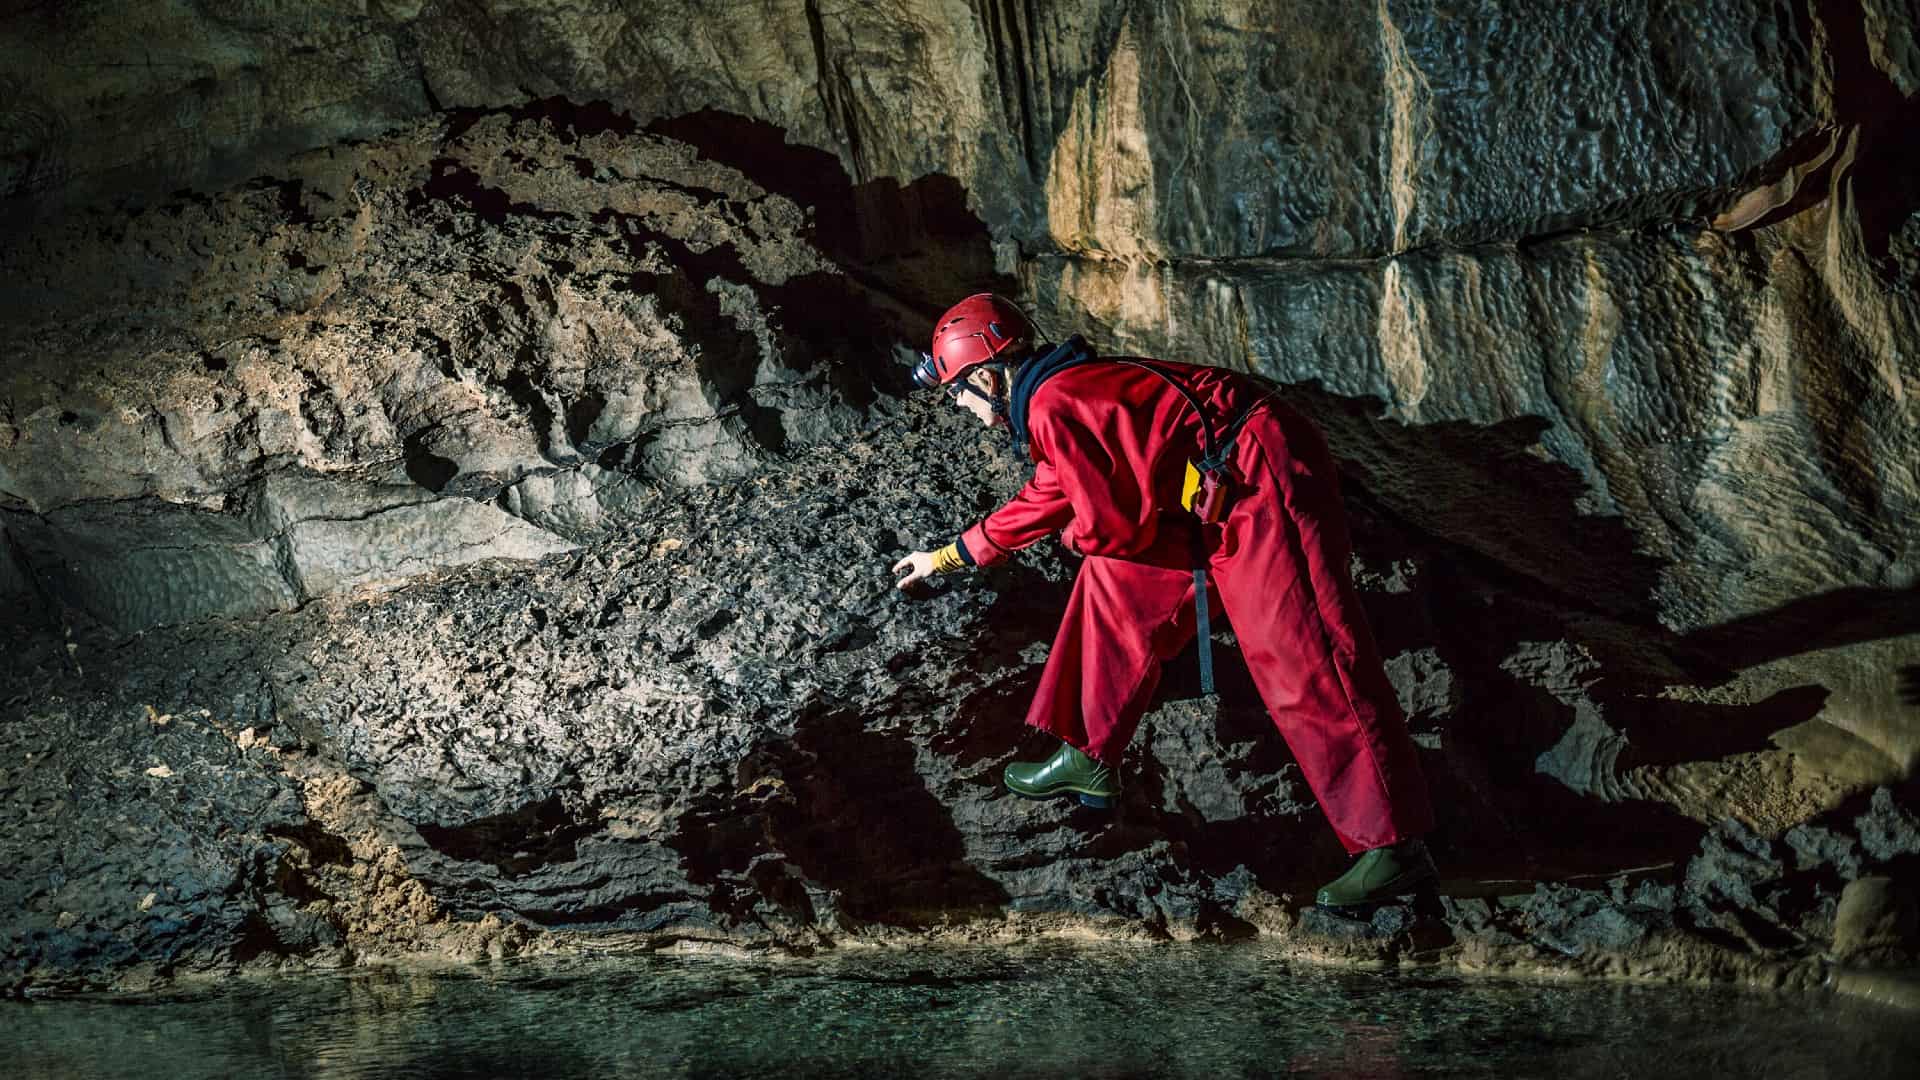 a geologist or mine worker looks closely at a rock formation in a darkened cave with water on the ground, wearing a full protective suit and hard hat.